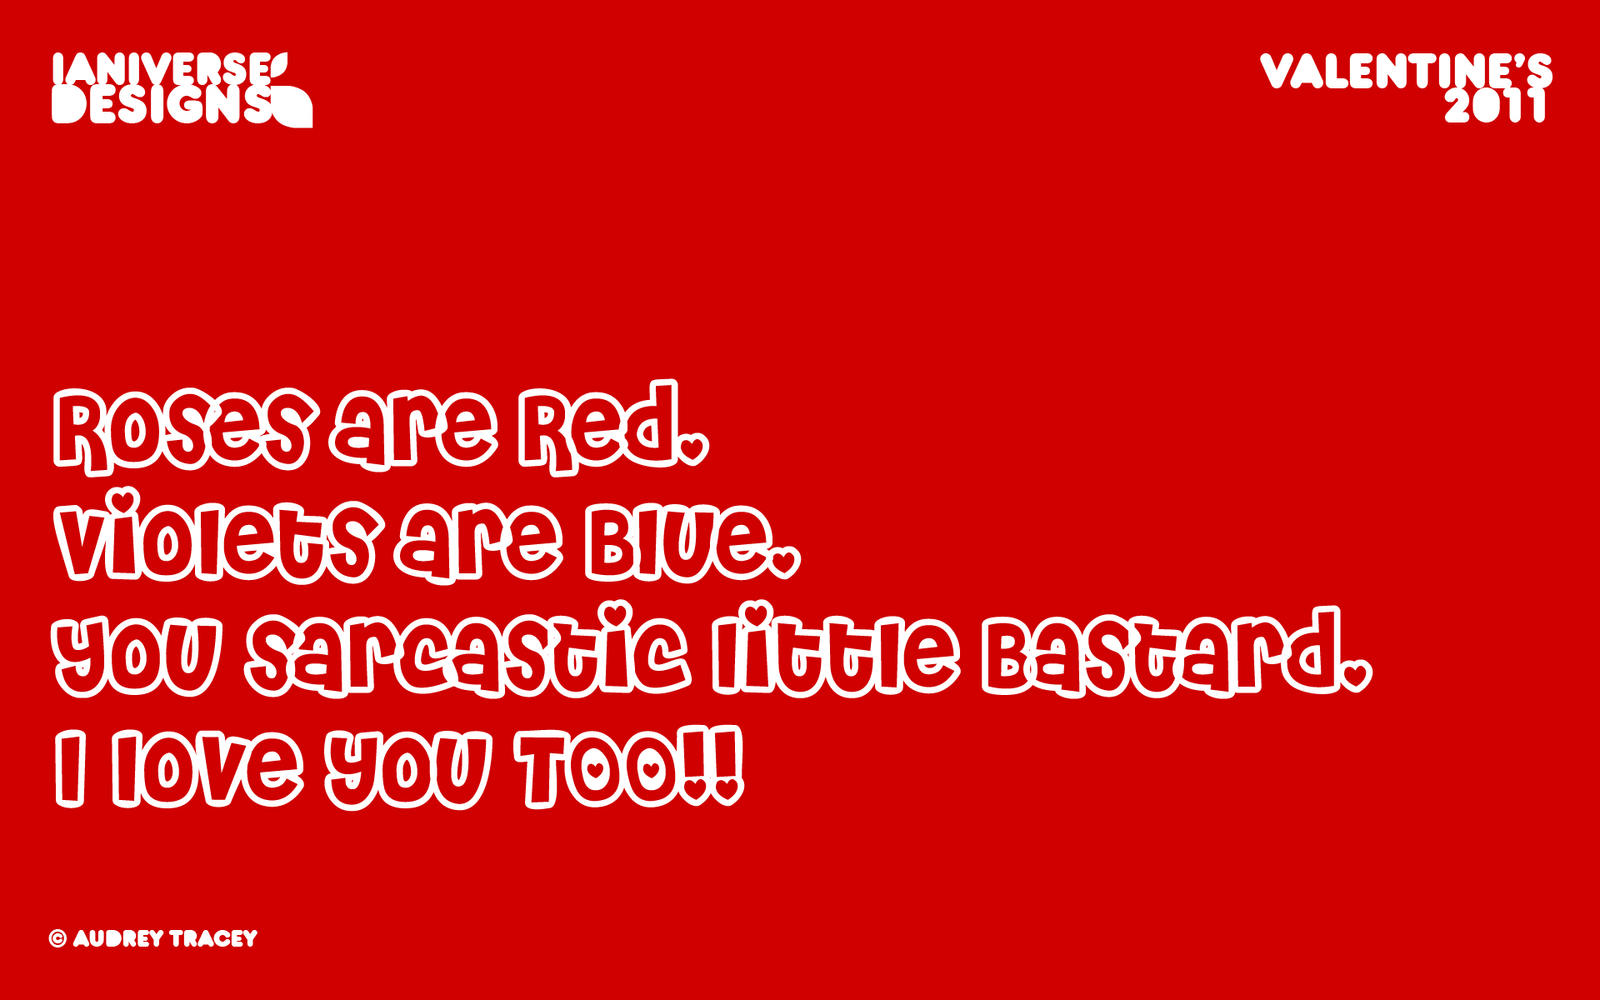 ... kb jpeg roses are red poems 700 x 520 46 kb jpeg roses are red poems